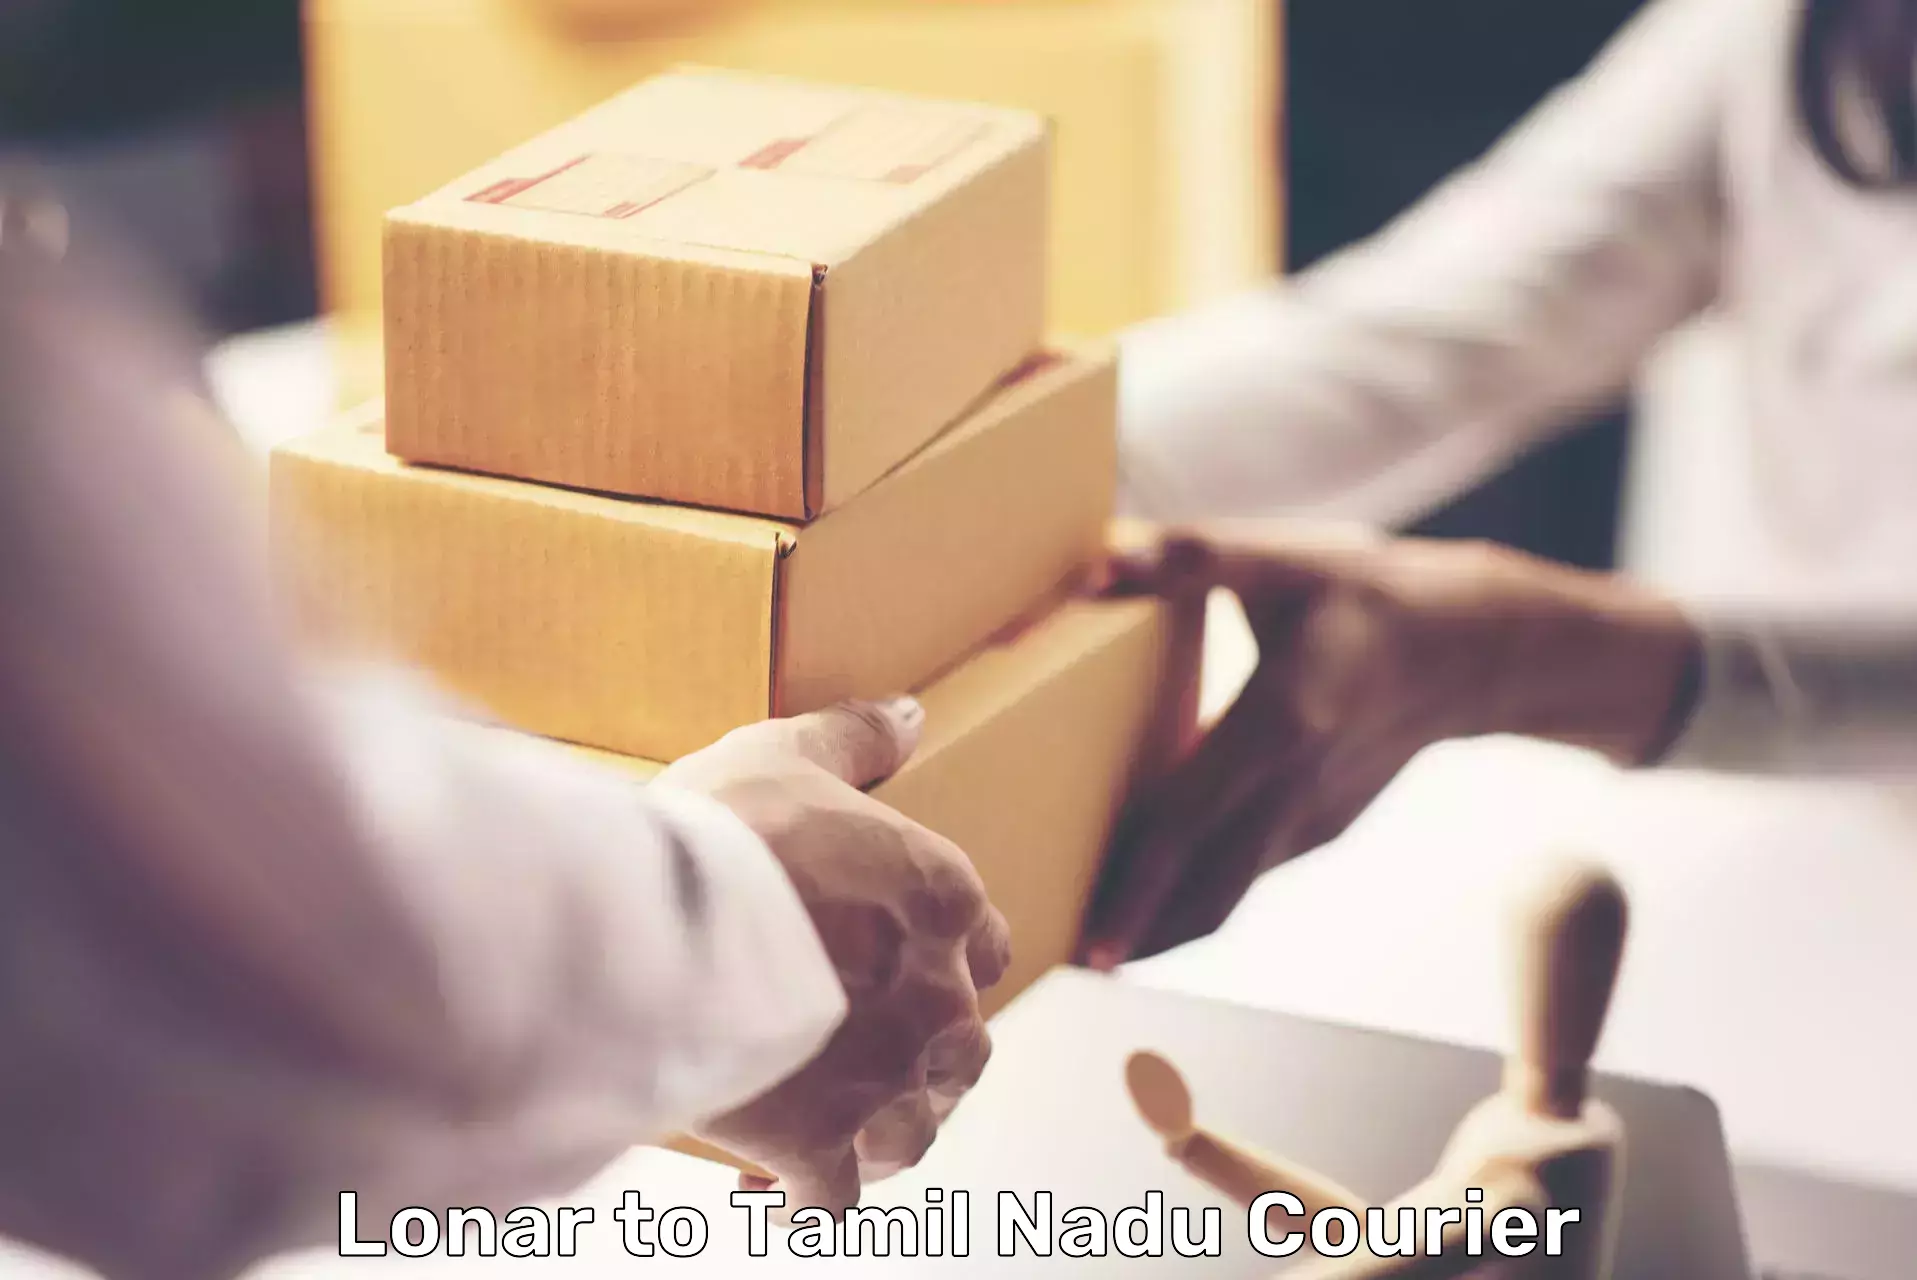 Personalized courier experiences Lonar to Trichy